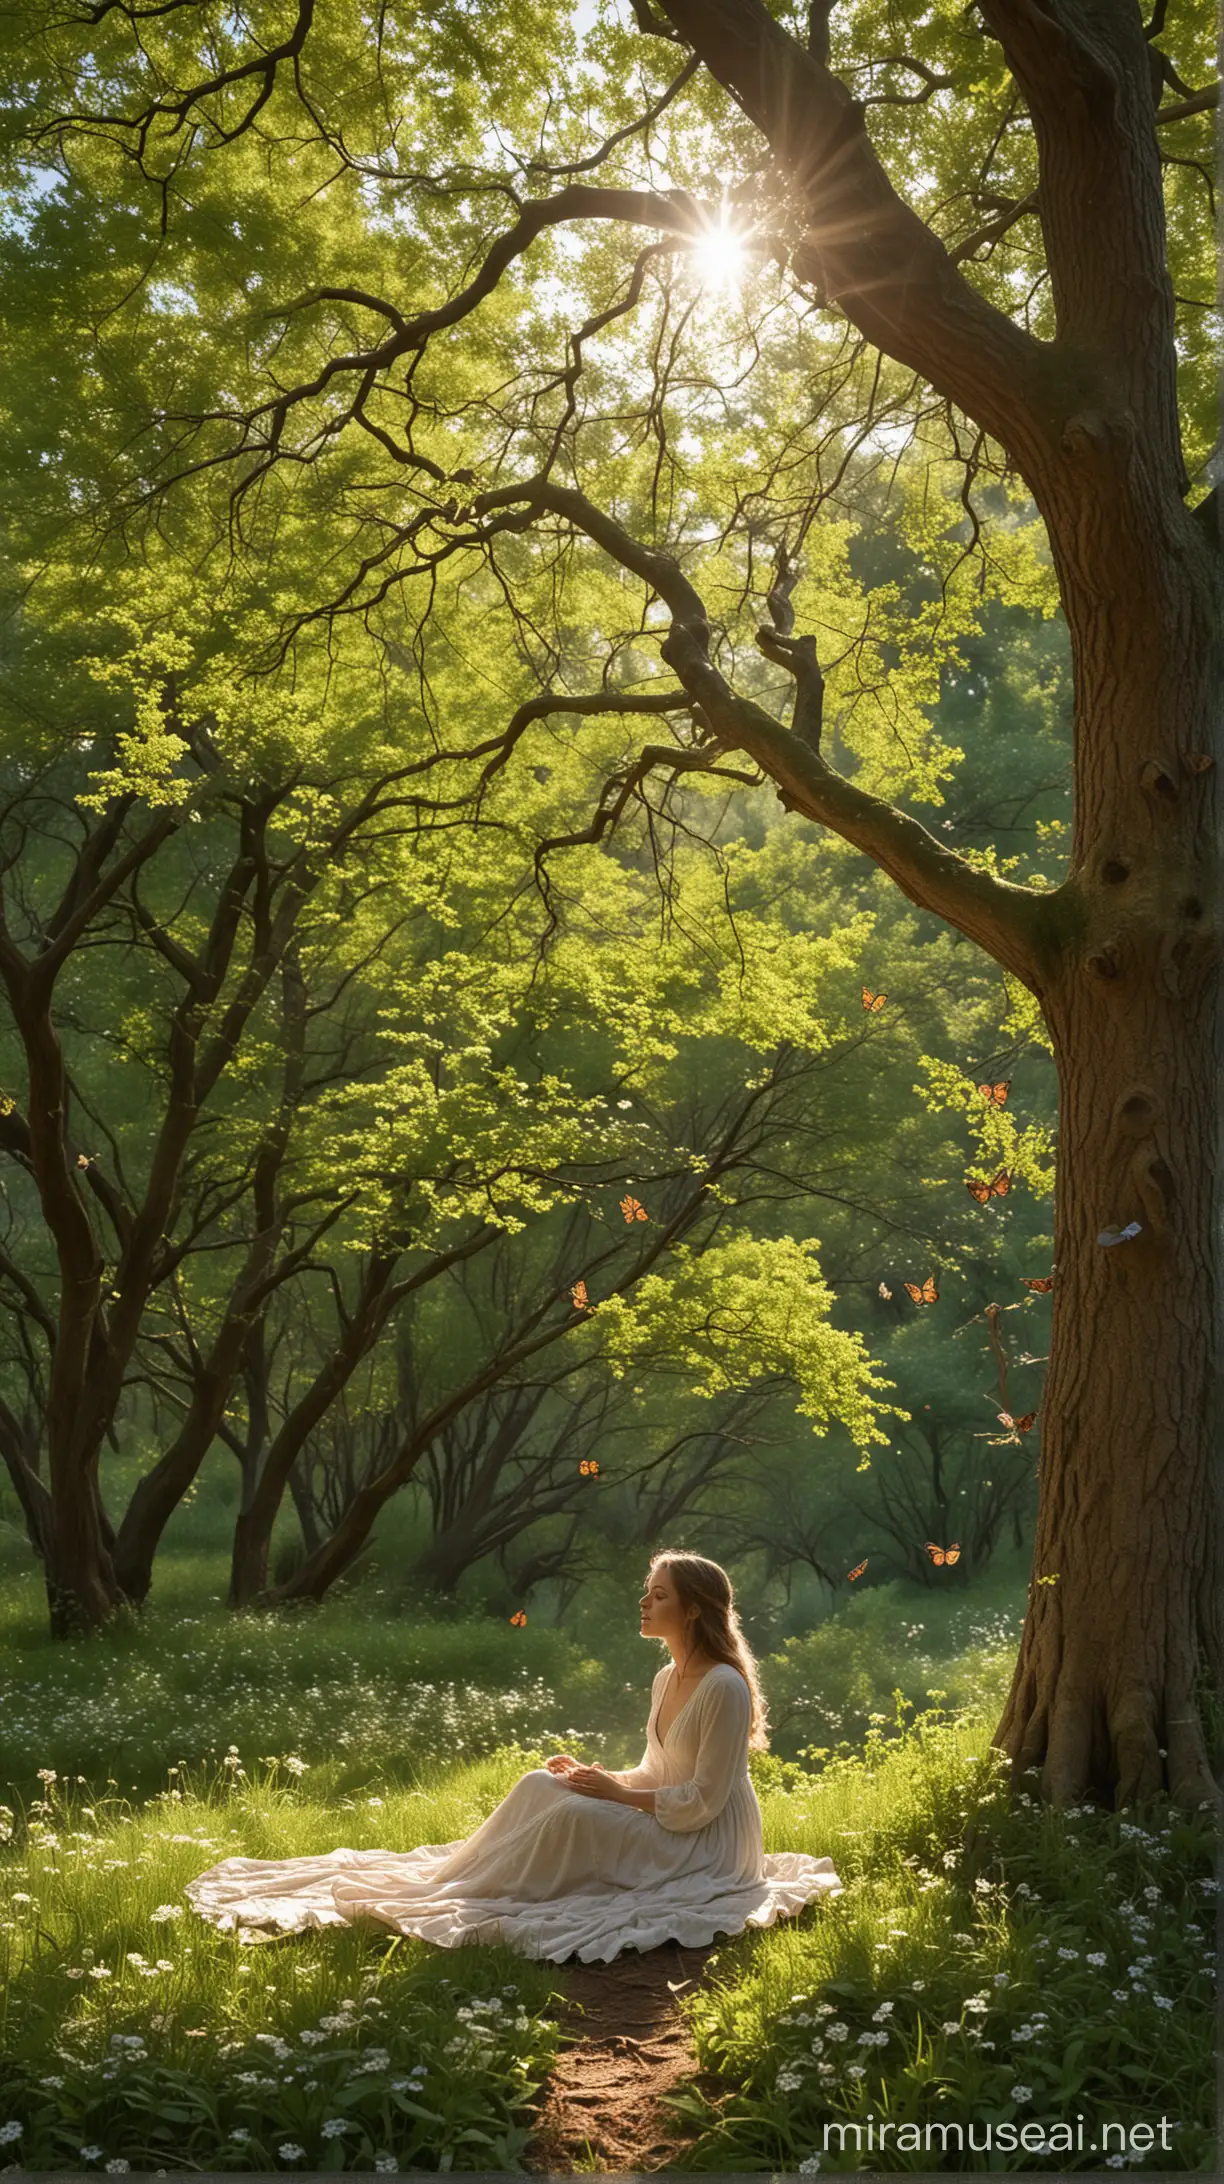 Serene Daydreaming in Utopian Forest Young Woman Amidst Ancient Oaks